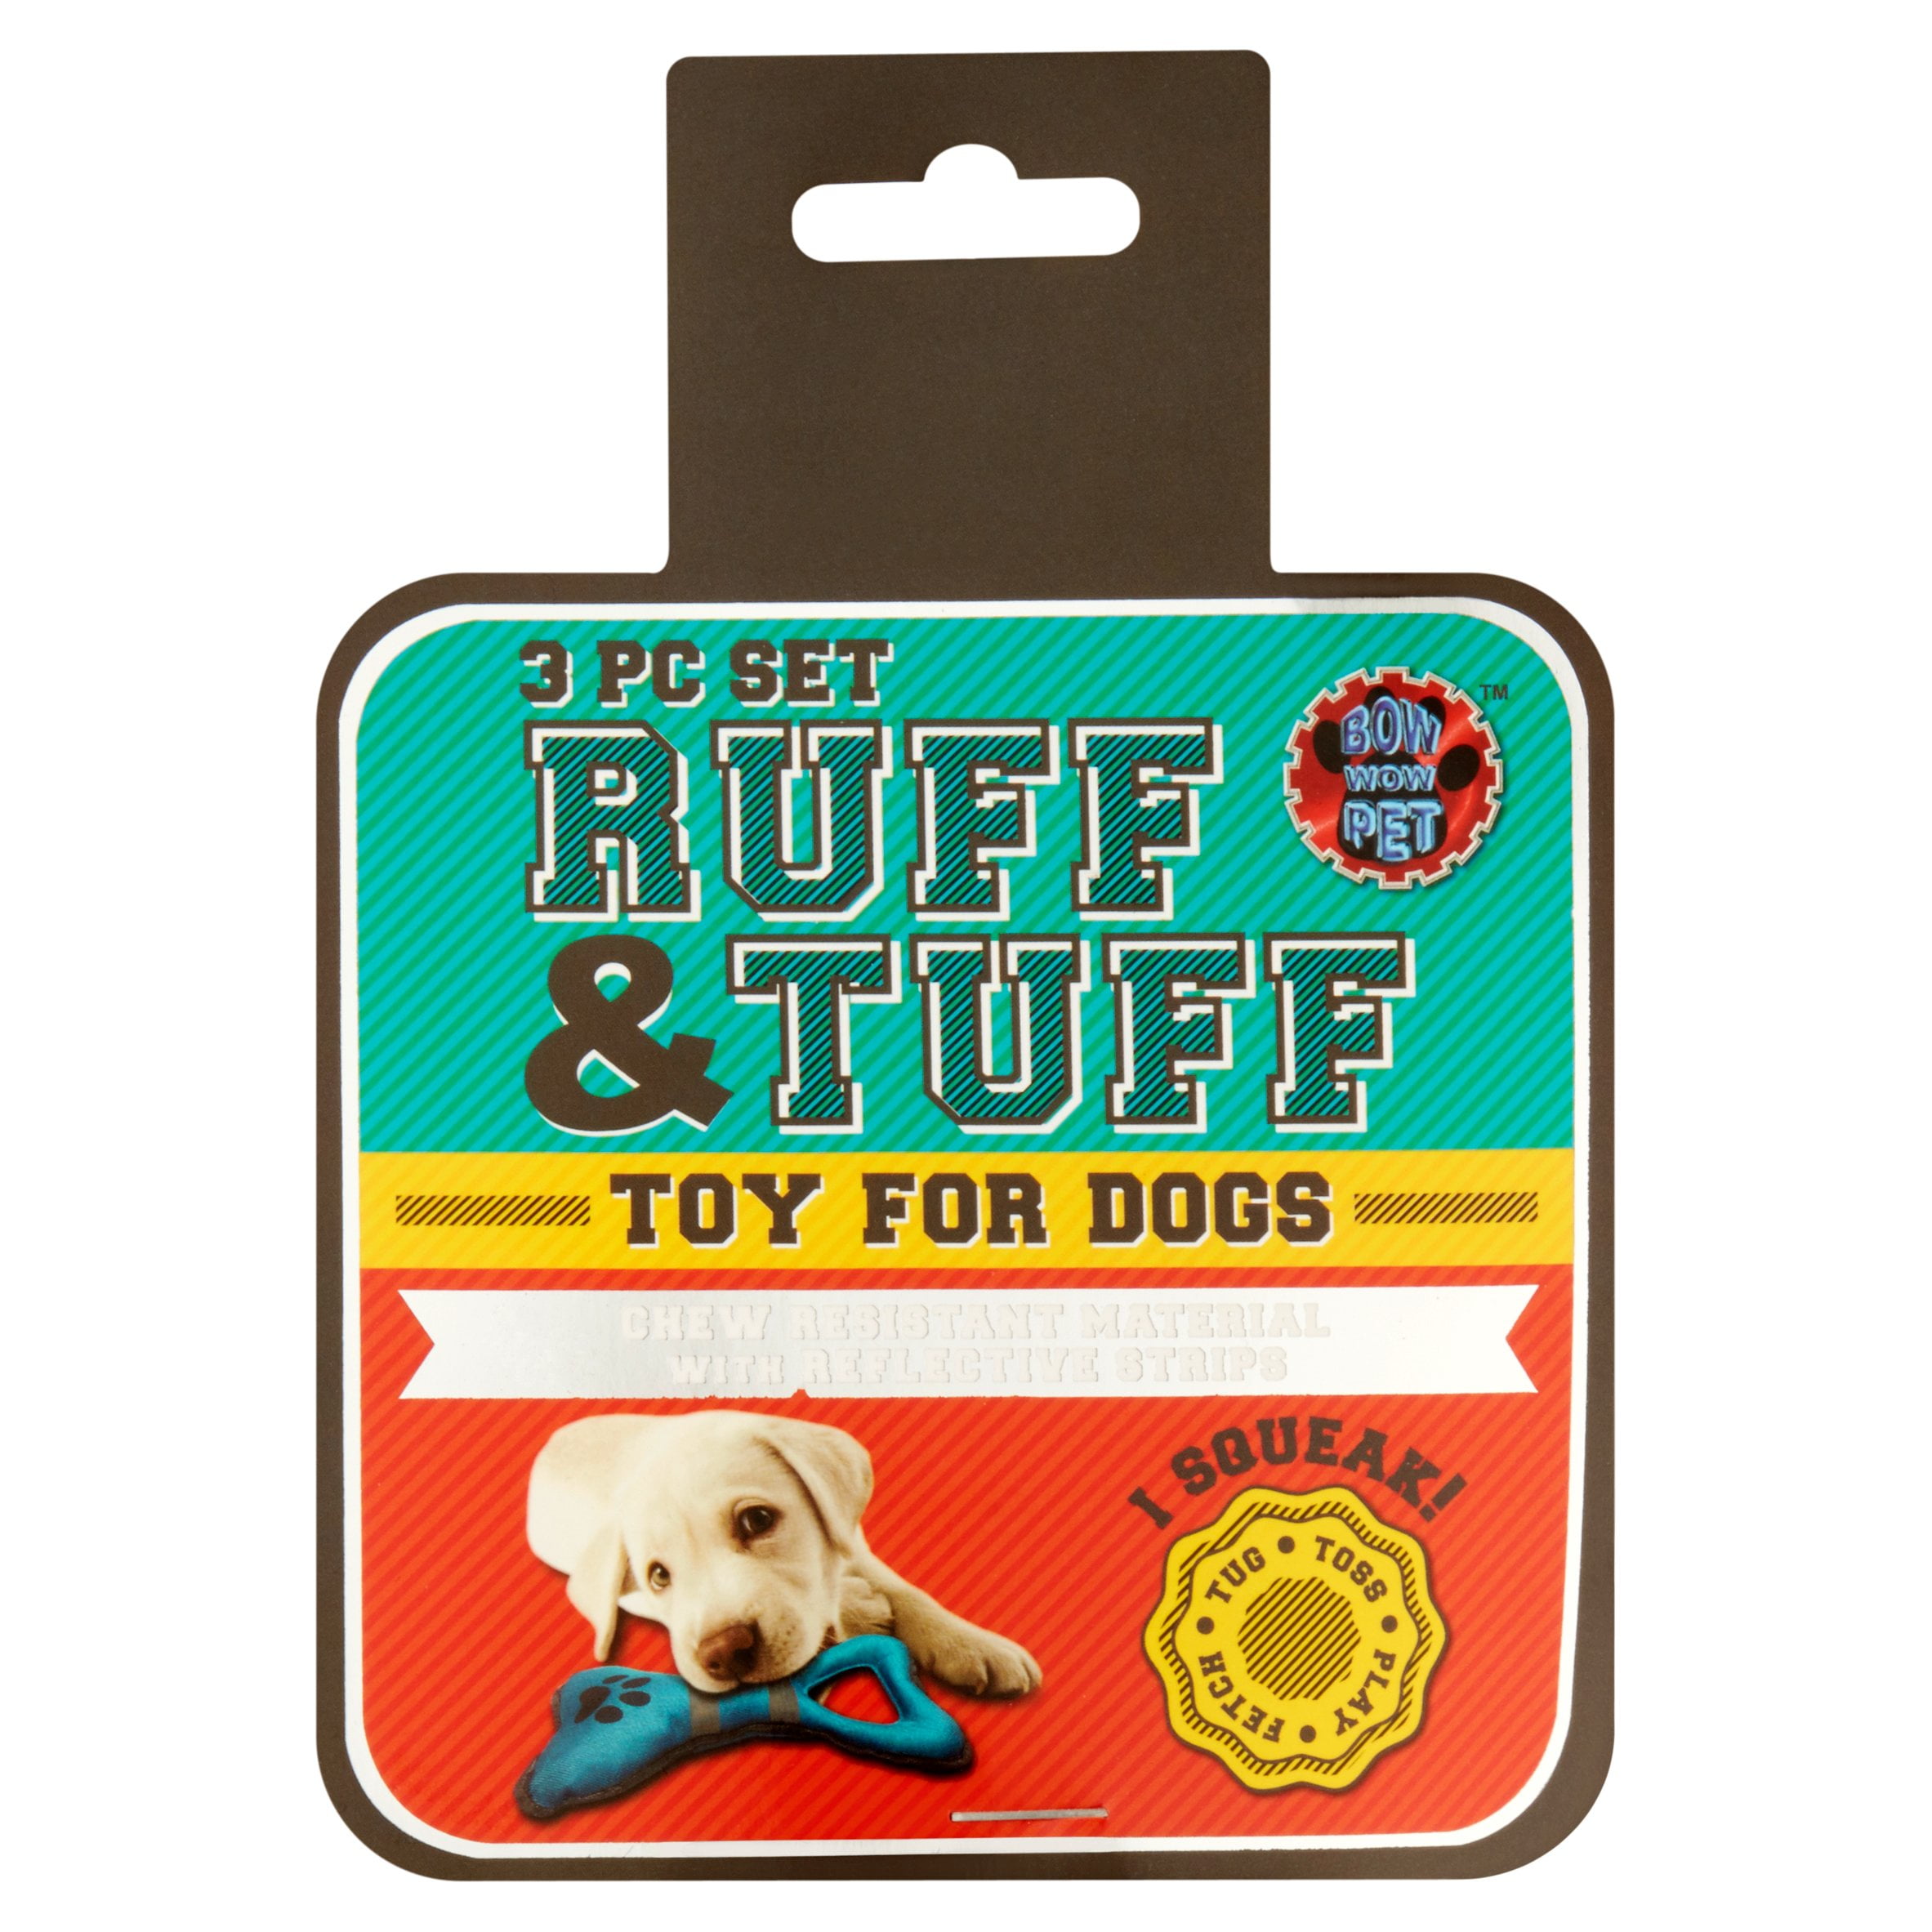 Review of Super Ruff GroovyToob Chew Toy for Dogs